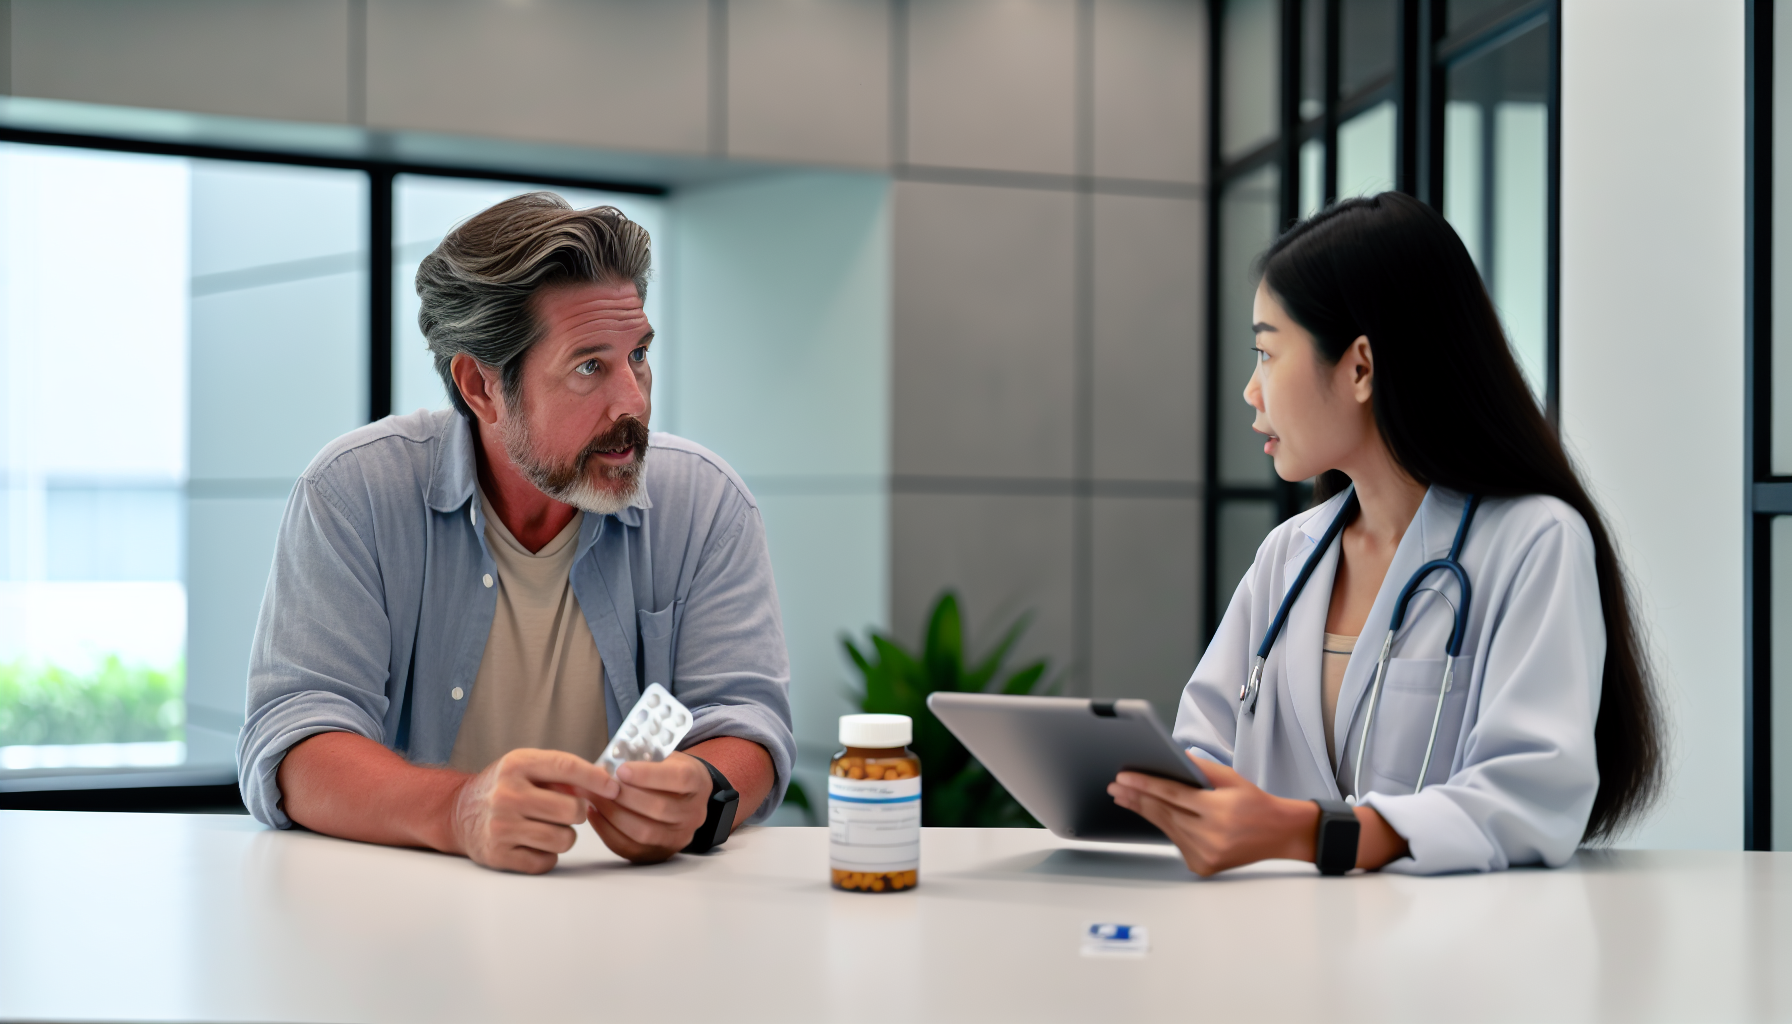 Photo of a person consulting with a healthcare provider about safe use of painkillers for herniated disc treatment